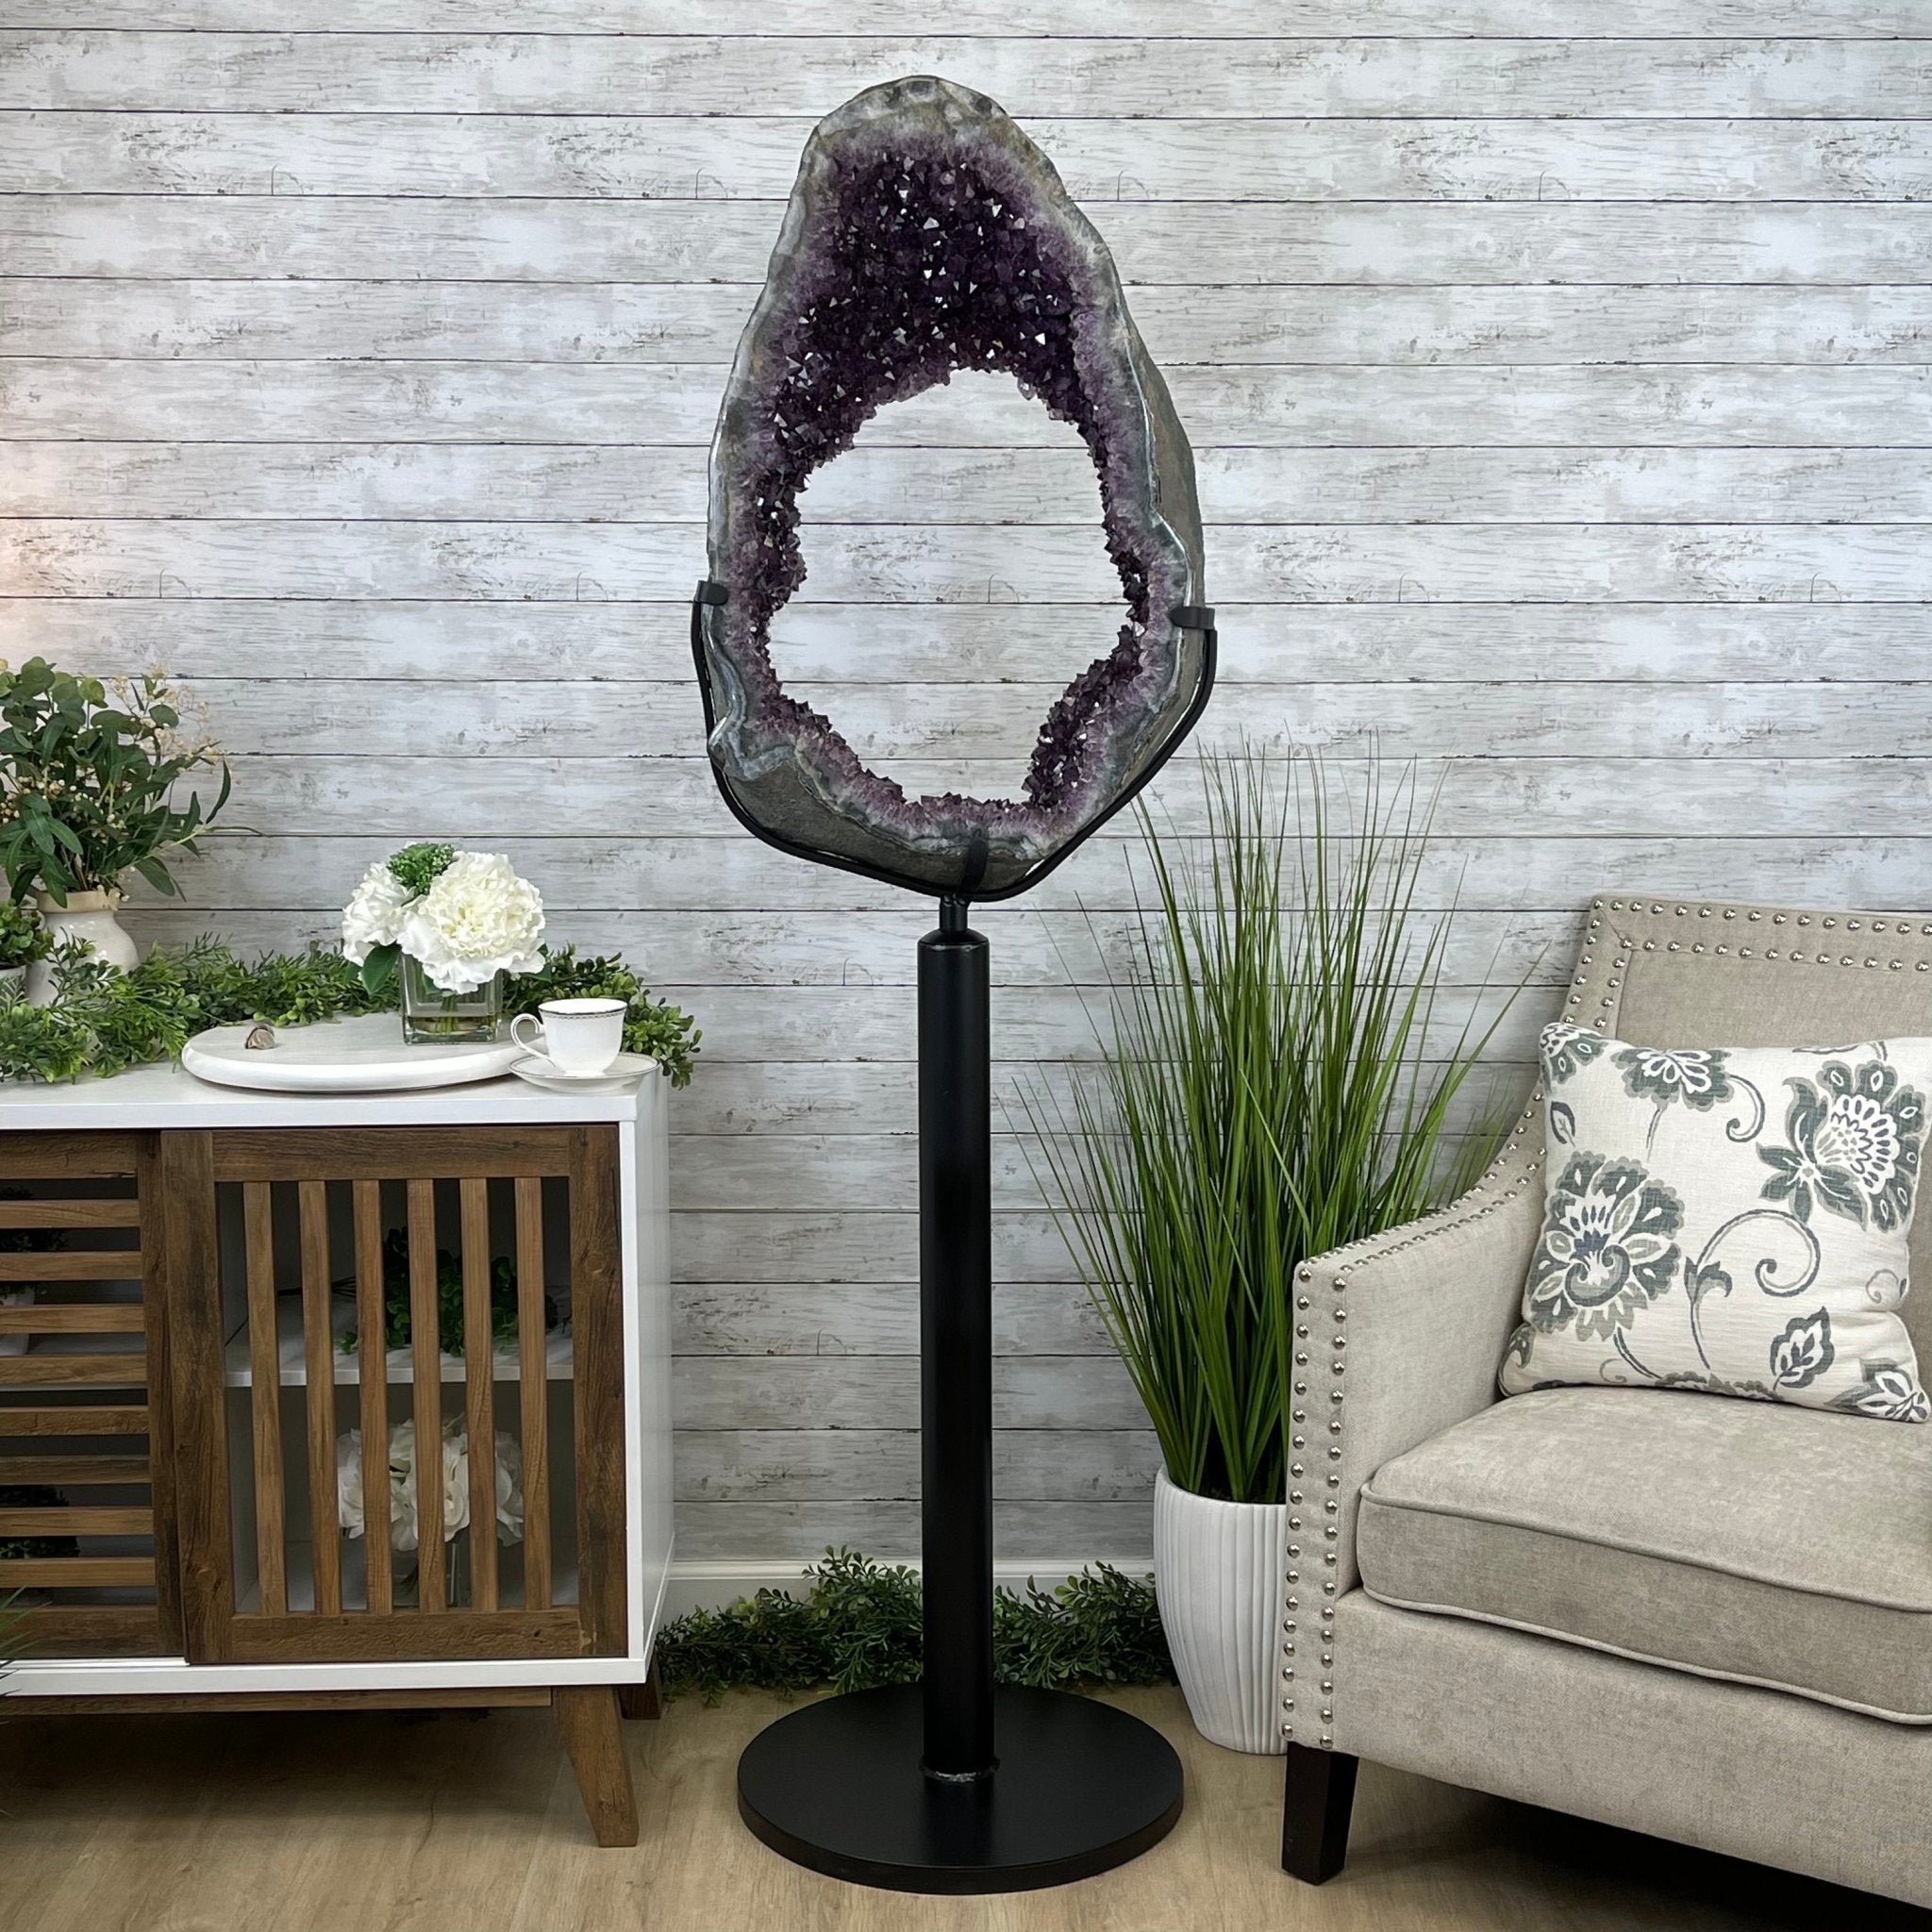 Extra Plus Quality Brazilian Amethyst Crystal Portal on a Tall Rotating Stand, 130.1 lbs & 70" tall Model #5604-0098 by Brazil Gems - Brazil GemsBrazil GemsExtra Plus Quality Brazilian Amethyst Crystal Portal on a Tall Rotating Stand, 130.1 lbs & 70" tall Model #5604-0098 by Brazil GemsPortals on Rotating Bases5604-0098